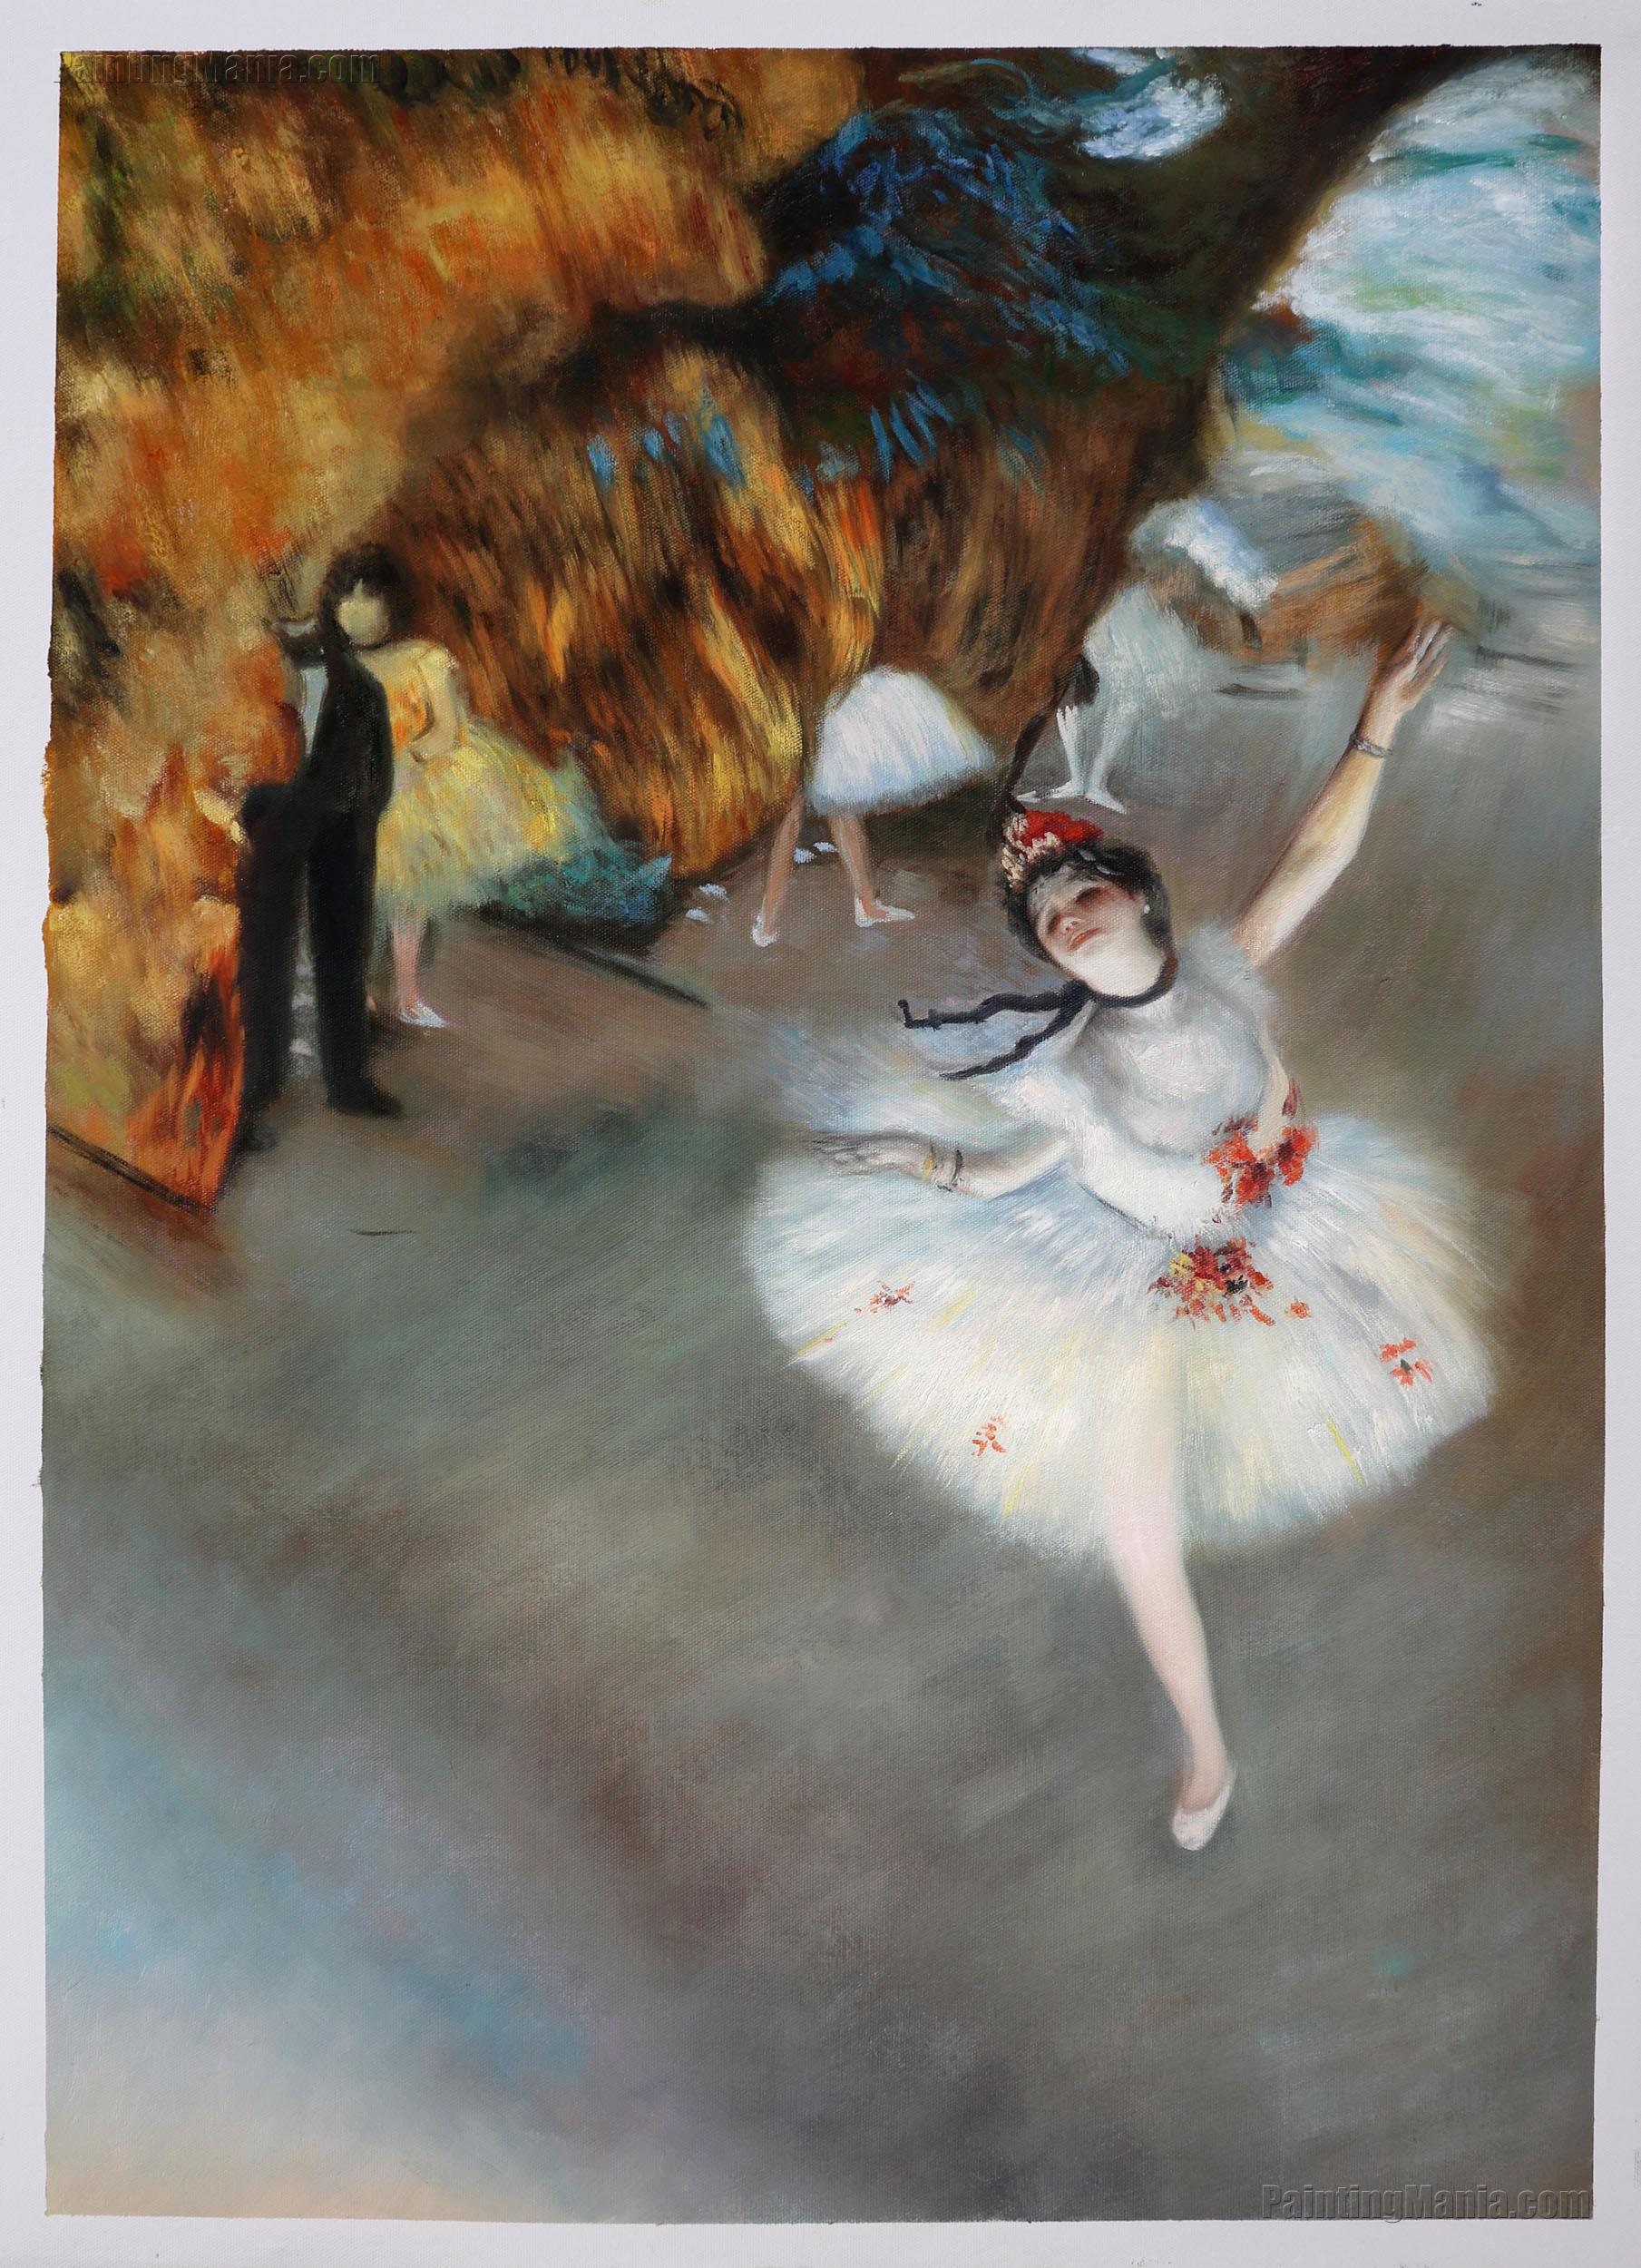 The Star - Edgar Degas hand-painted oil painting reproduction,Coffee Room  Wall Art,Ballerina Dancing,Theater Room Decor,graceful dancing art